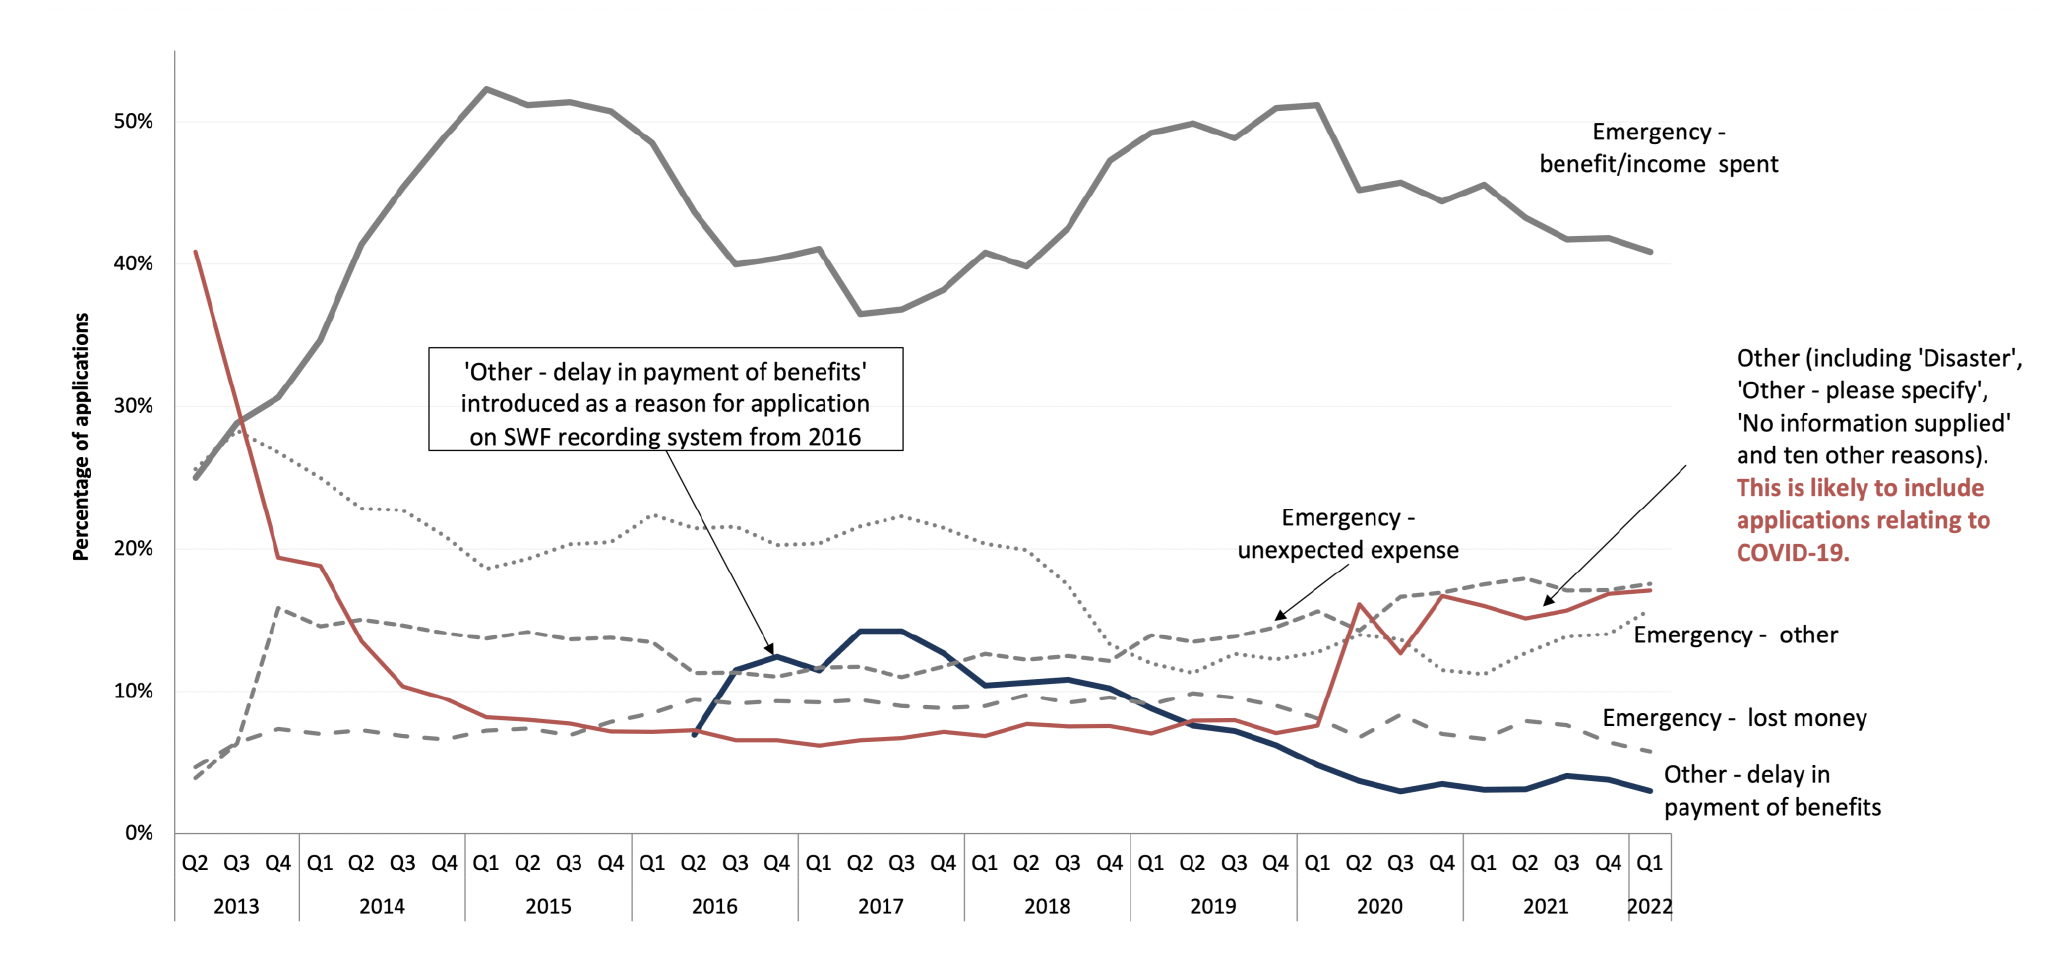 This figure shows a line chart of the percentage of CG applications recorded with the following reasons for application: Emergence - benefit/income spent; Other - delay in payment of benefits; Other (including disaster_; Emergency - other; Emergency - lost money. The trends over time are shown from 2013 to 2022. The main trends are described in the text. 